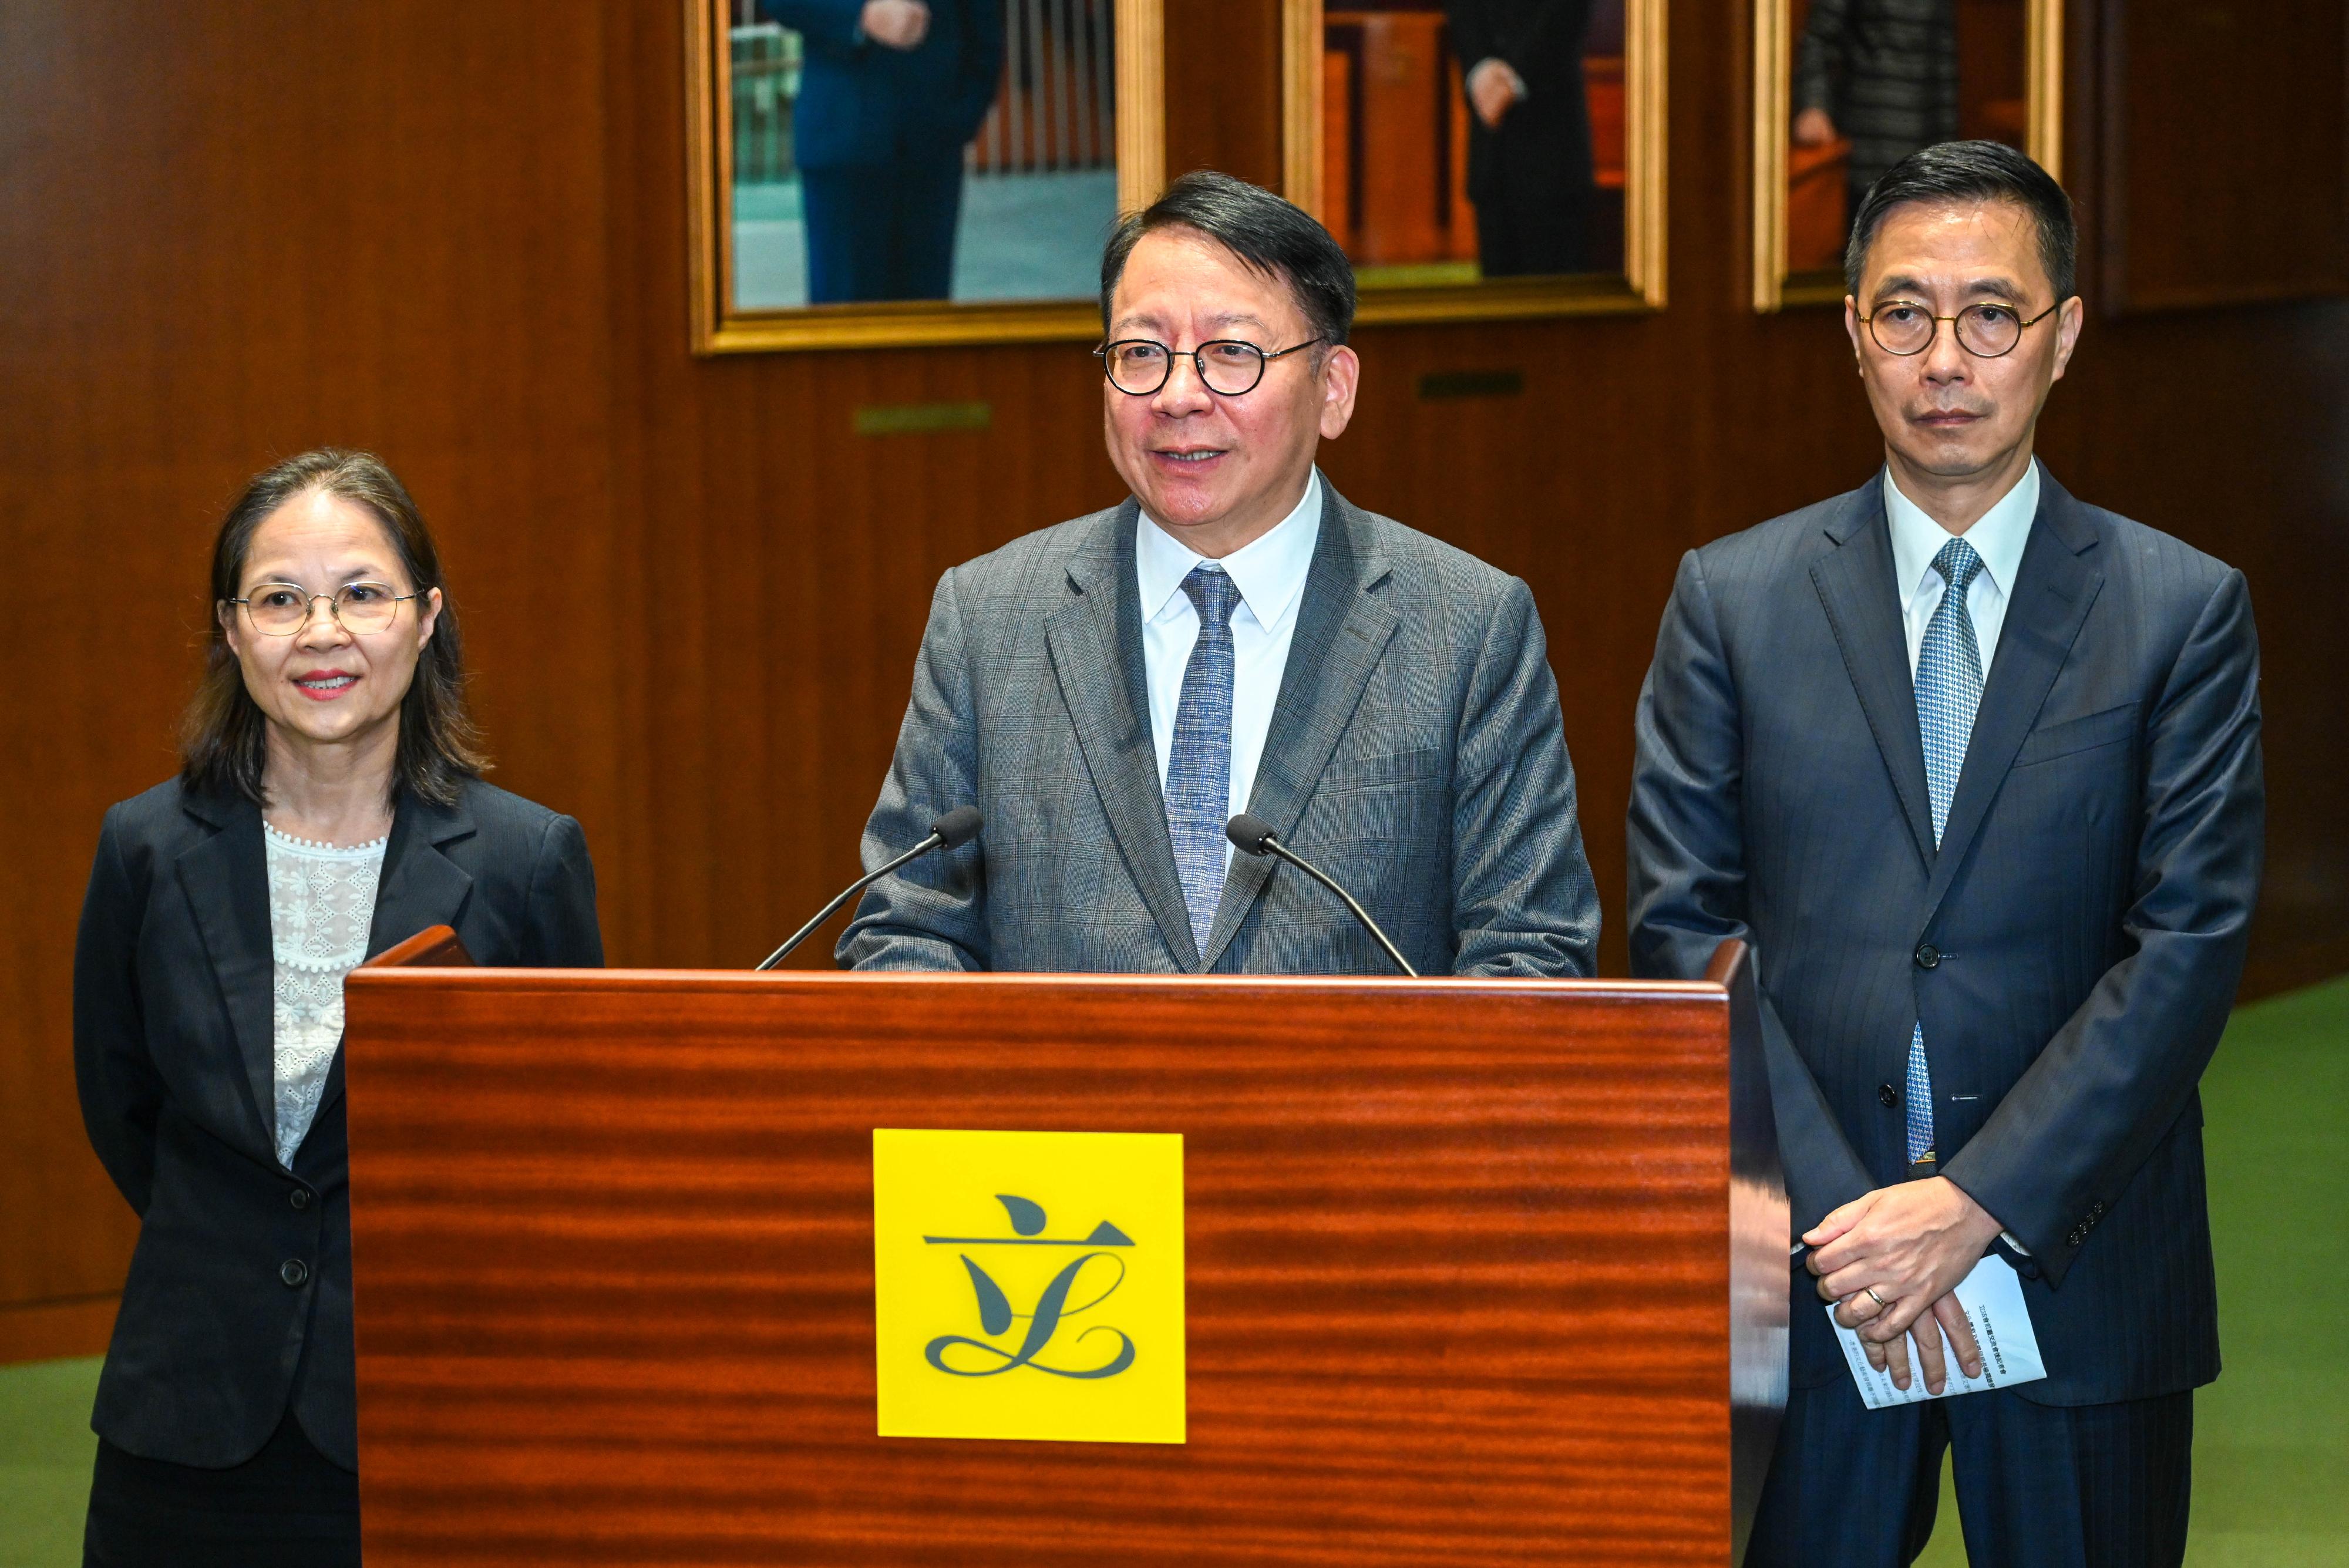 The Chief Secretary for Administration, Mr Chan Kwok-ki (centre); the Secretary for Culture, Sports and Tourism, Mr Kevin Yeung (right); and the Under Secretary for Environment and Ecology, Miss Diane Wong (left), meet the media after attending the Ante Chamber exchange session at the Legislative Council today (March 22).